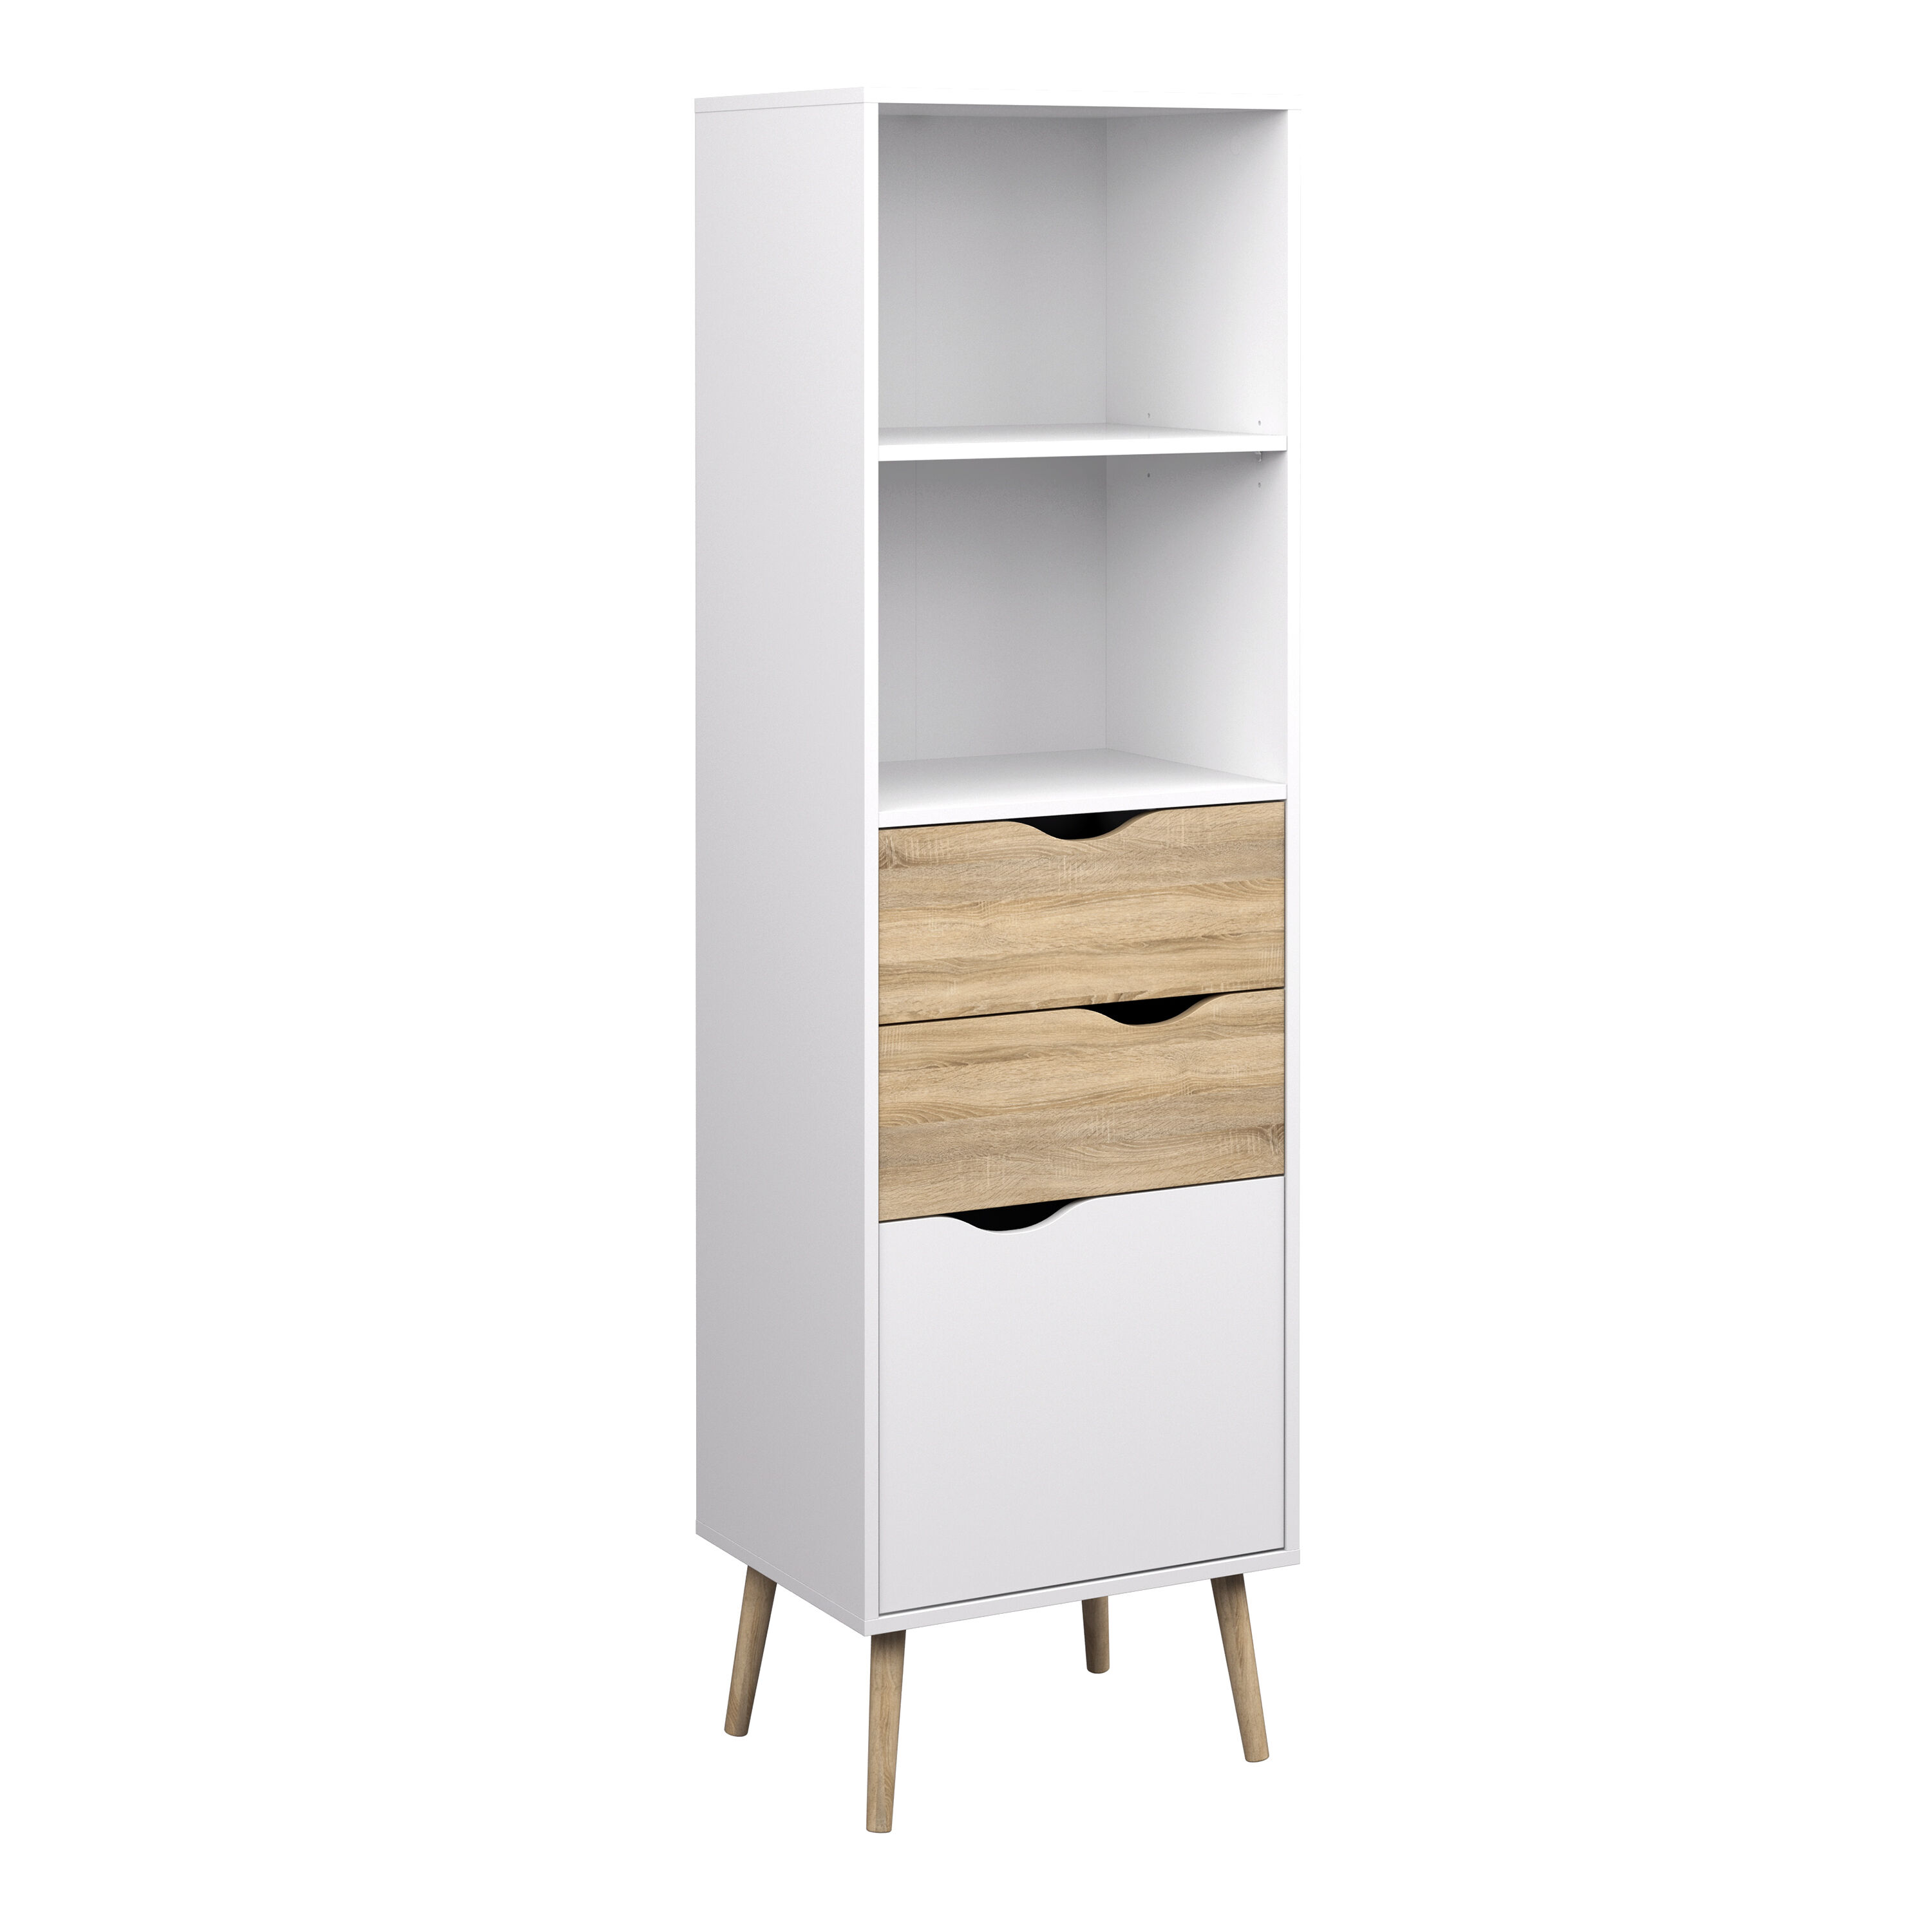 Oslo Bookcase With 2 Drawers 1 Door   White and Oak   Self Assembly